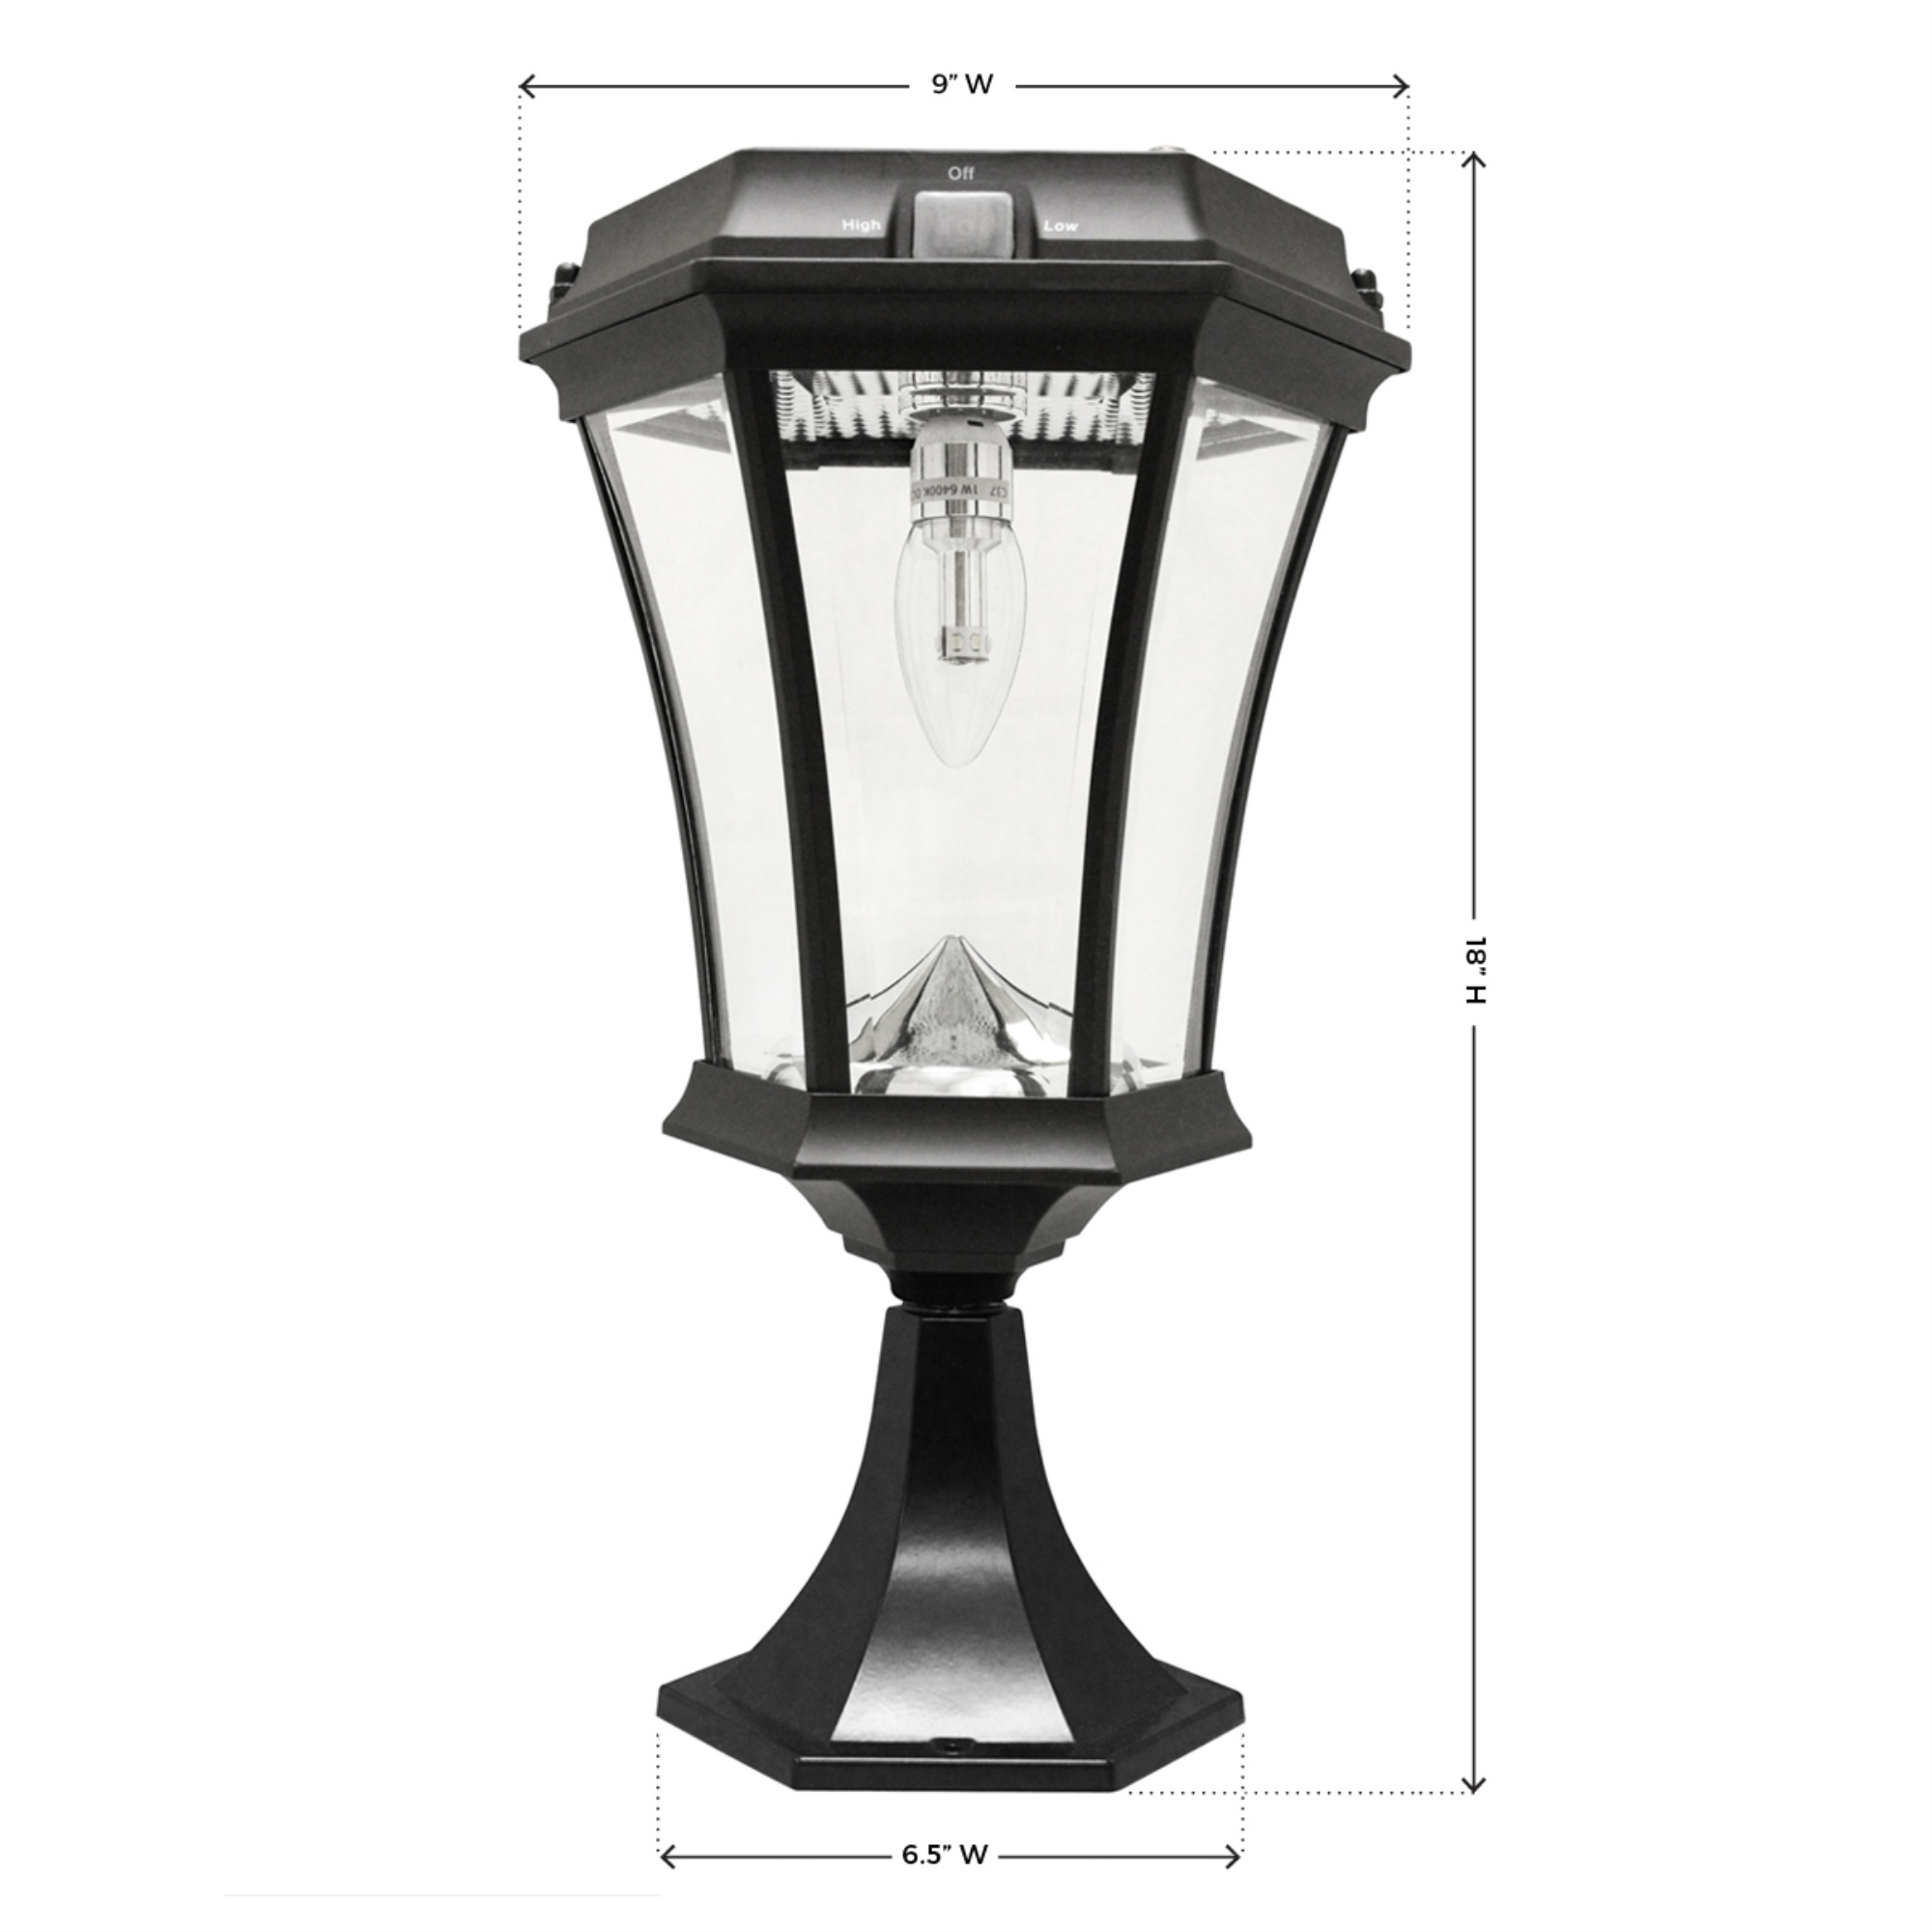 Gama Sonic Victorian Solar Outdoor LED Light Fixture, Bright-White LEDs GS-94FPW - Pole/Post/Wall Mount Kit - Black Finish